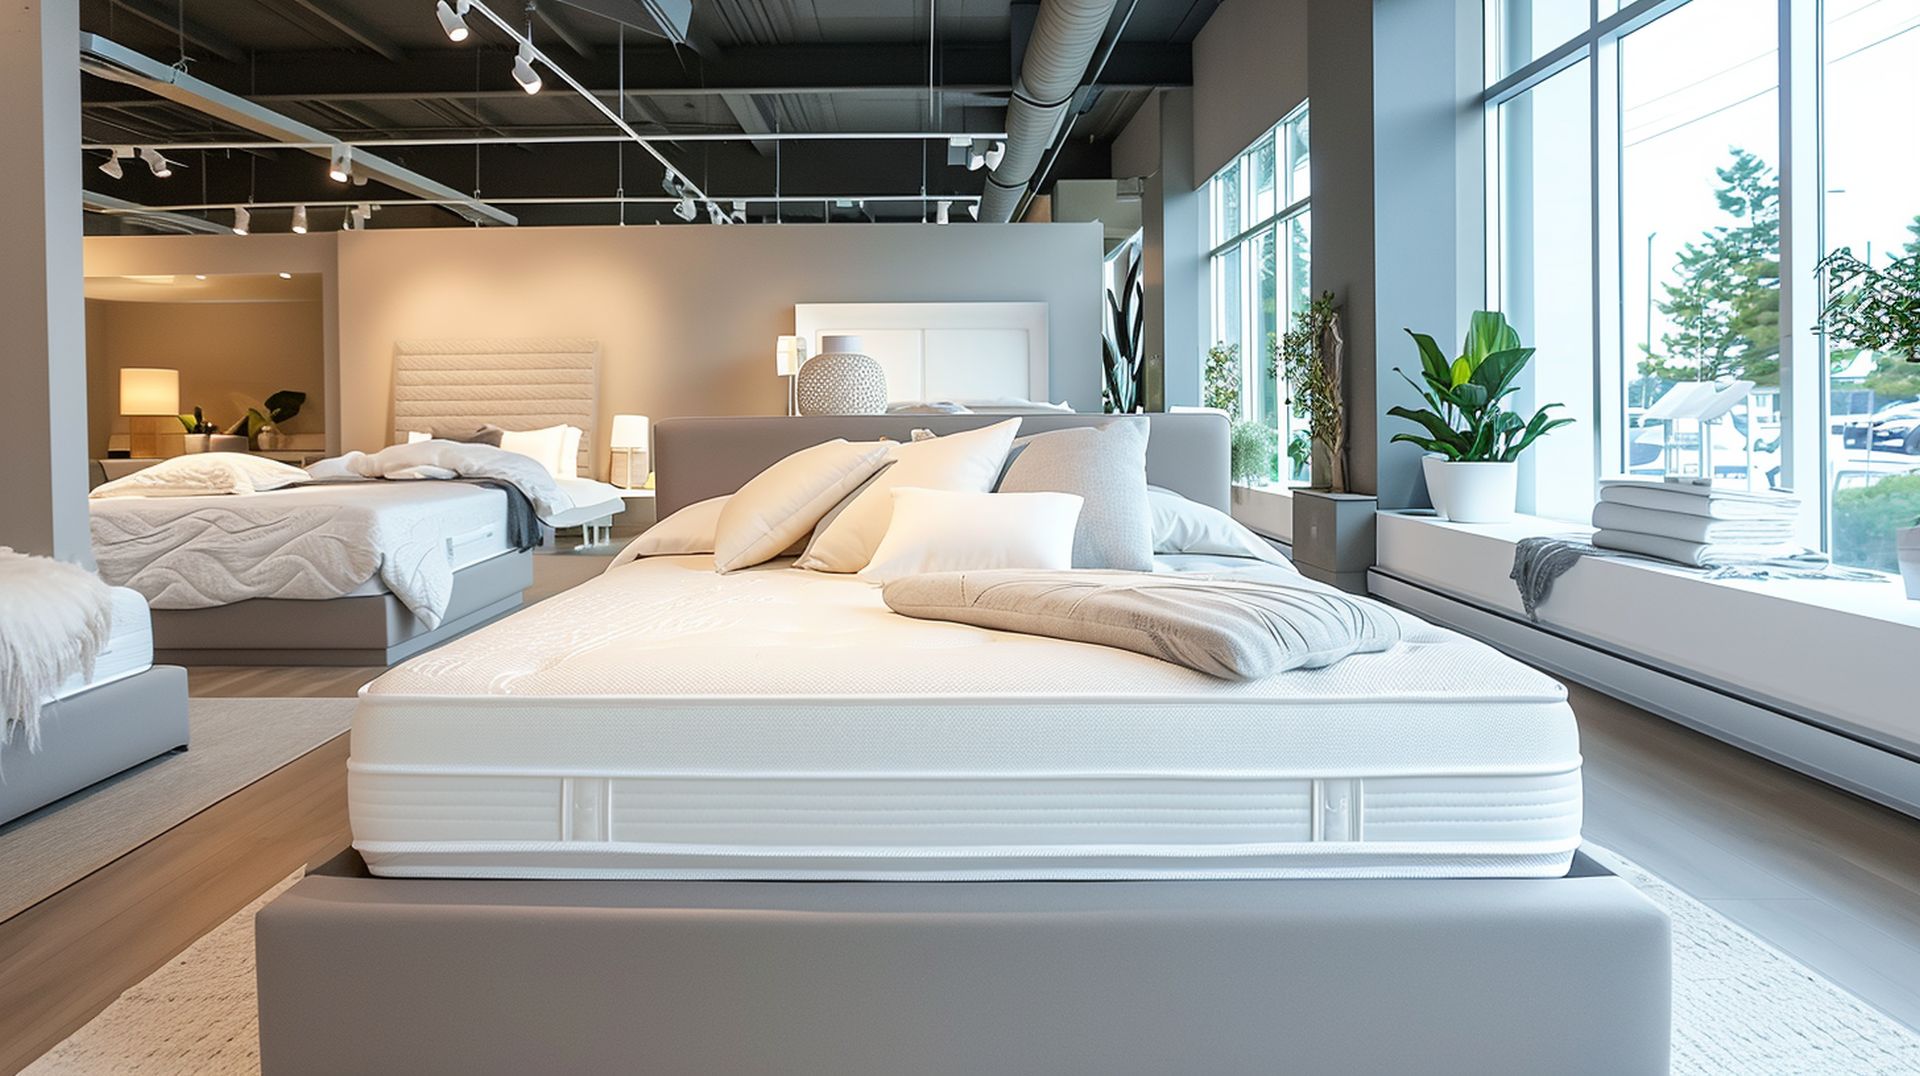 Types of mattresses at mattress dealers in The Colony, TX